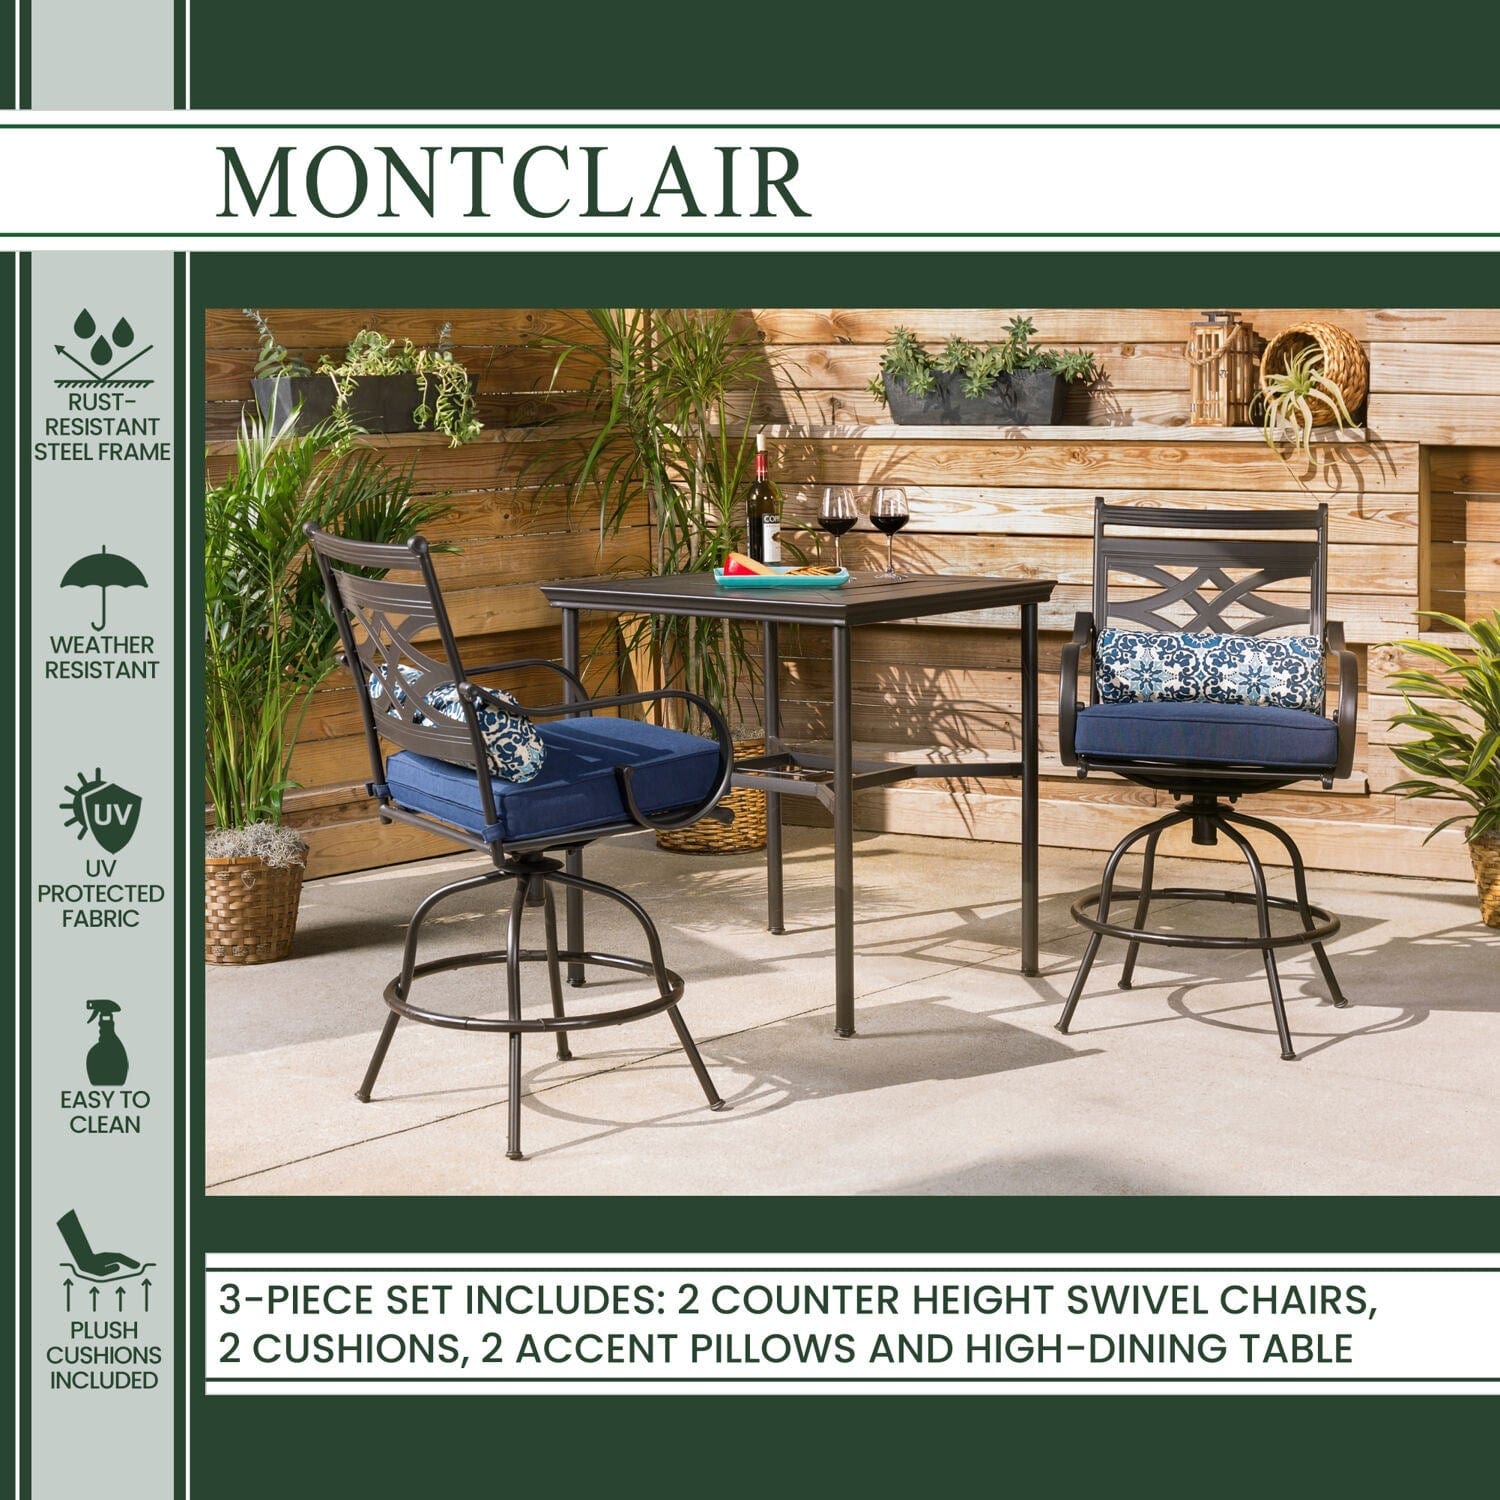 Hanover Outdoor Dining Set Hanover Montclair 3-Piece High-Dining Set in Navy Blue with 2 Swivel Chairs and a 33-Inch Square Table | MCLRDN3PCBRSW2-NVY